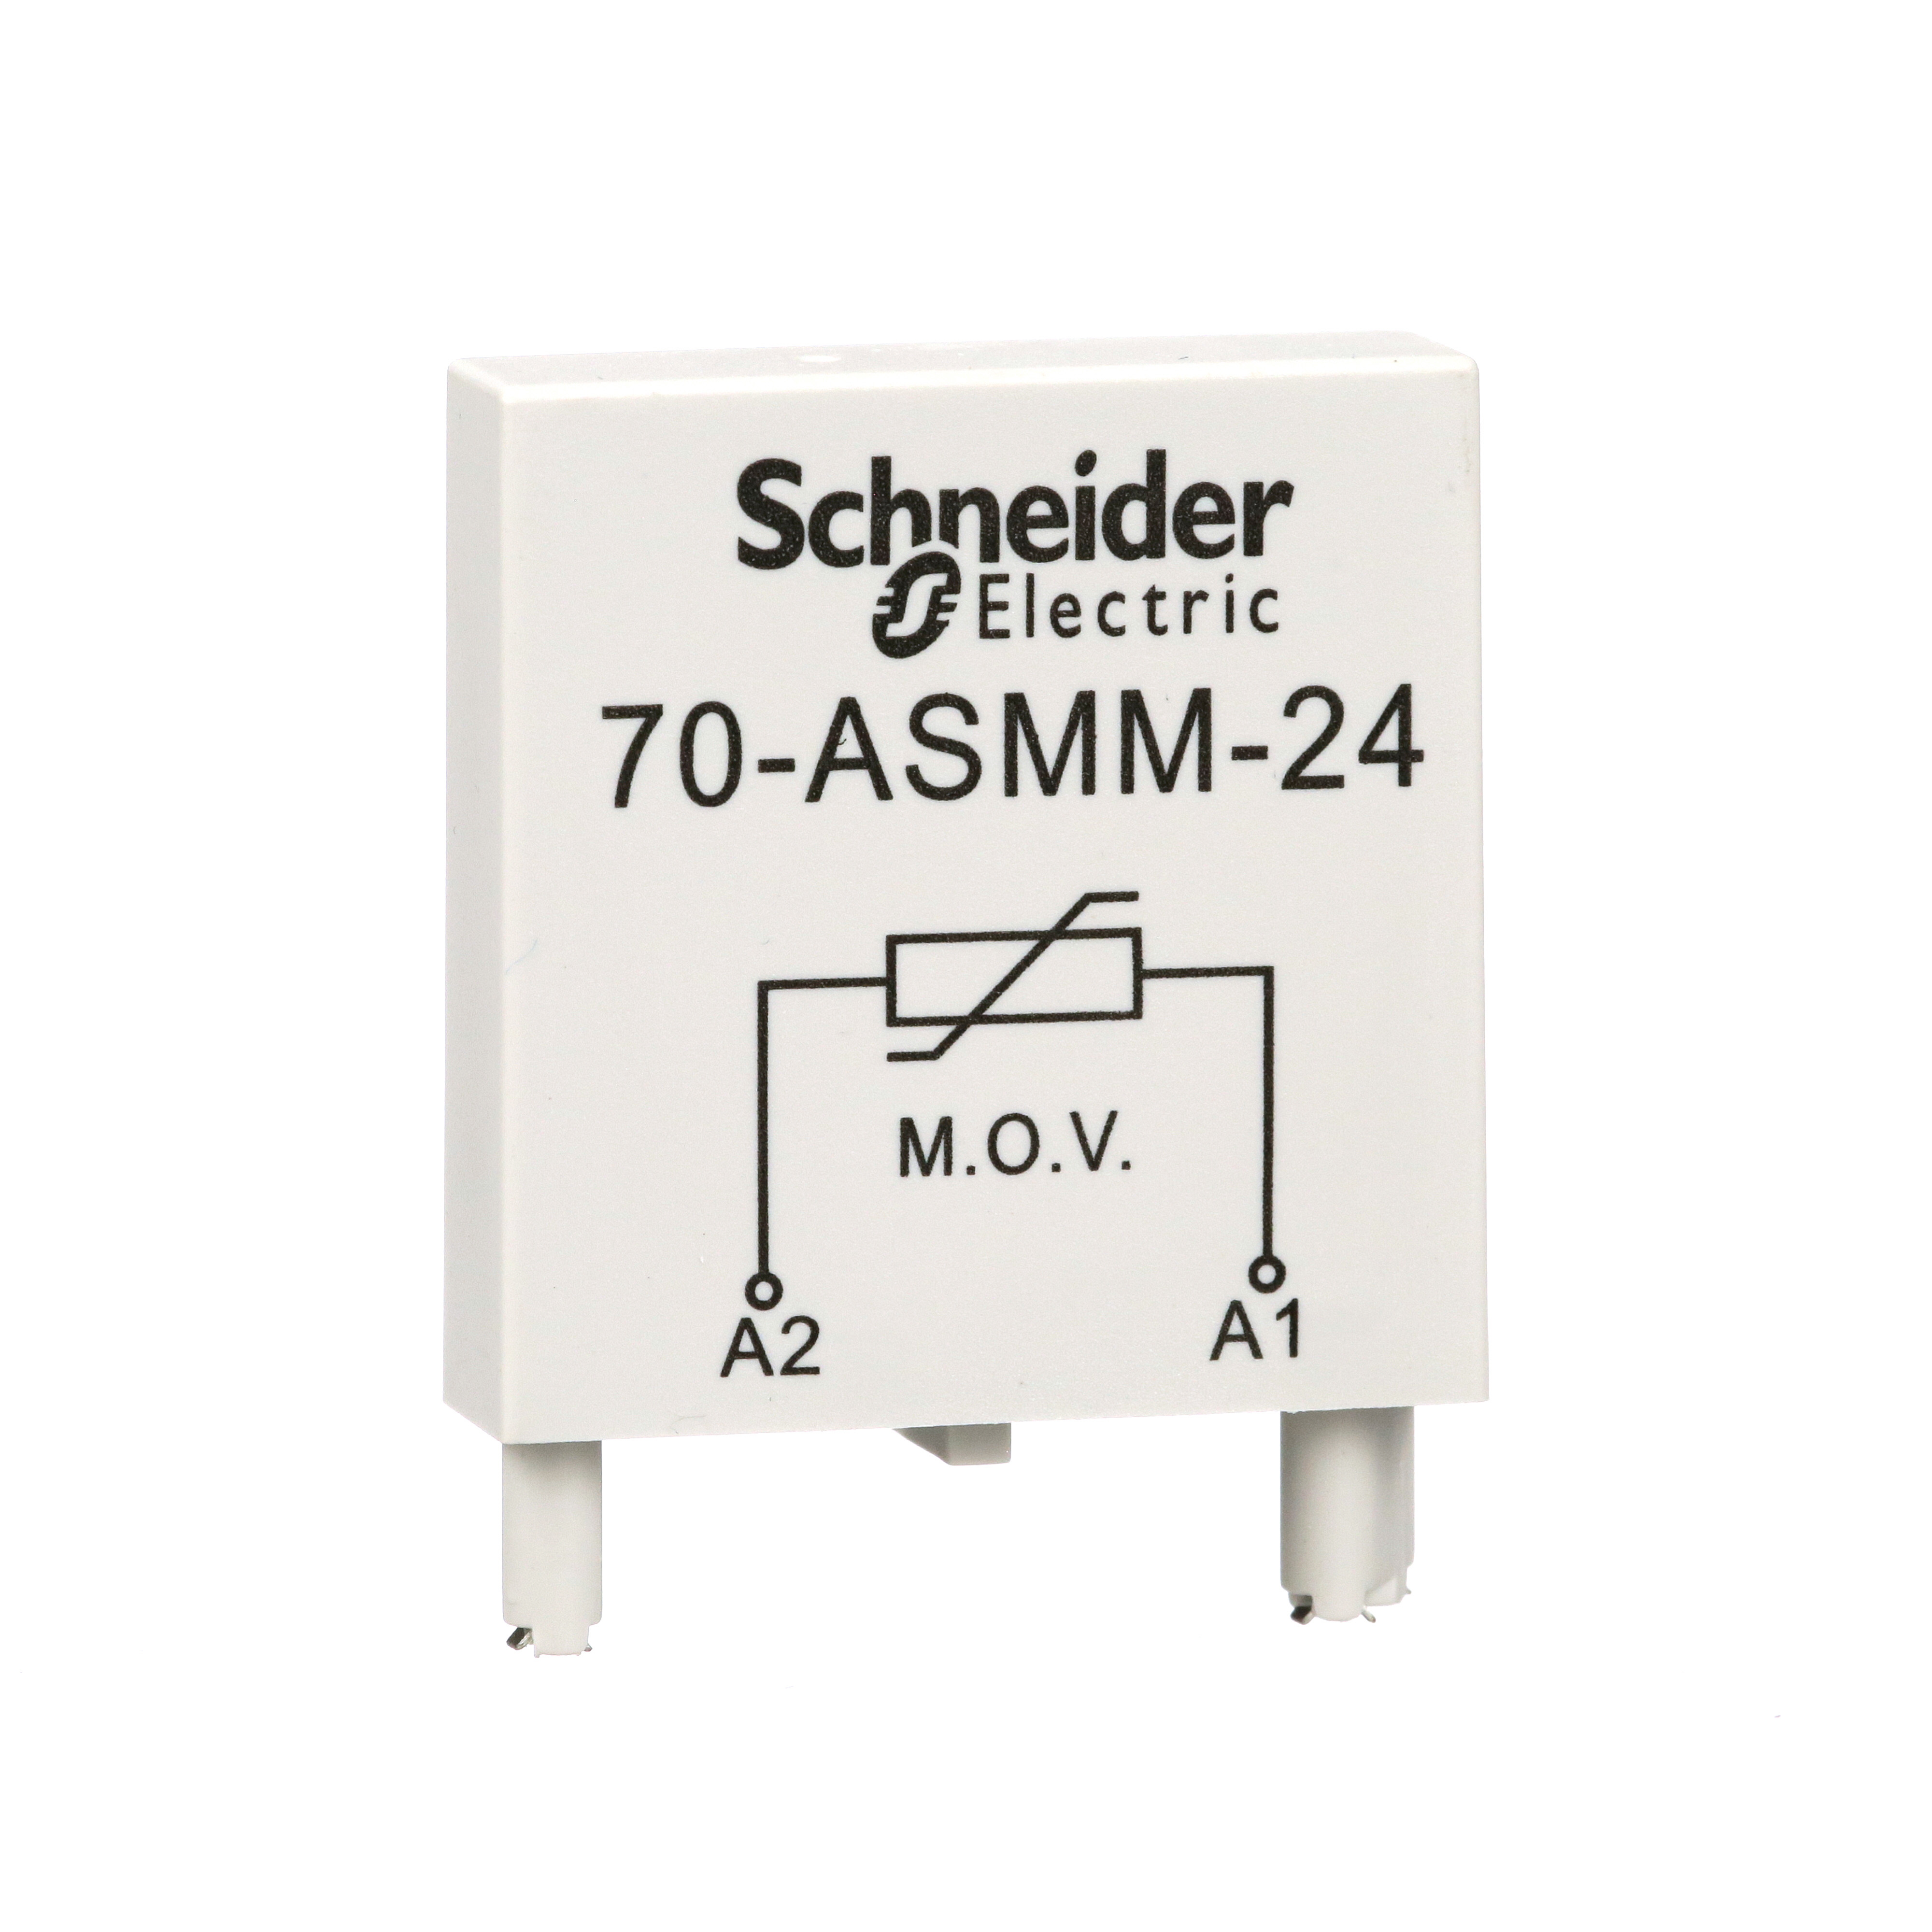 Protection module with MOV suppressor, SE Relays, for 725 power relays, 24V AC/V DC